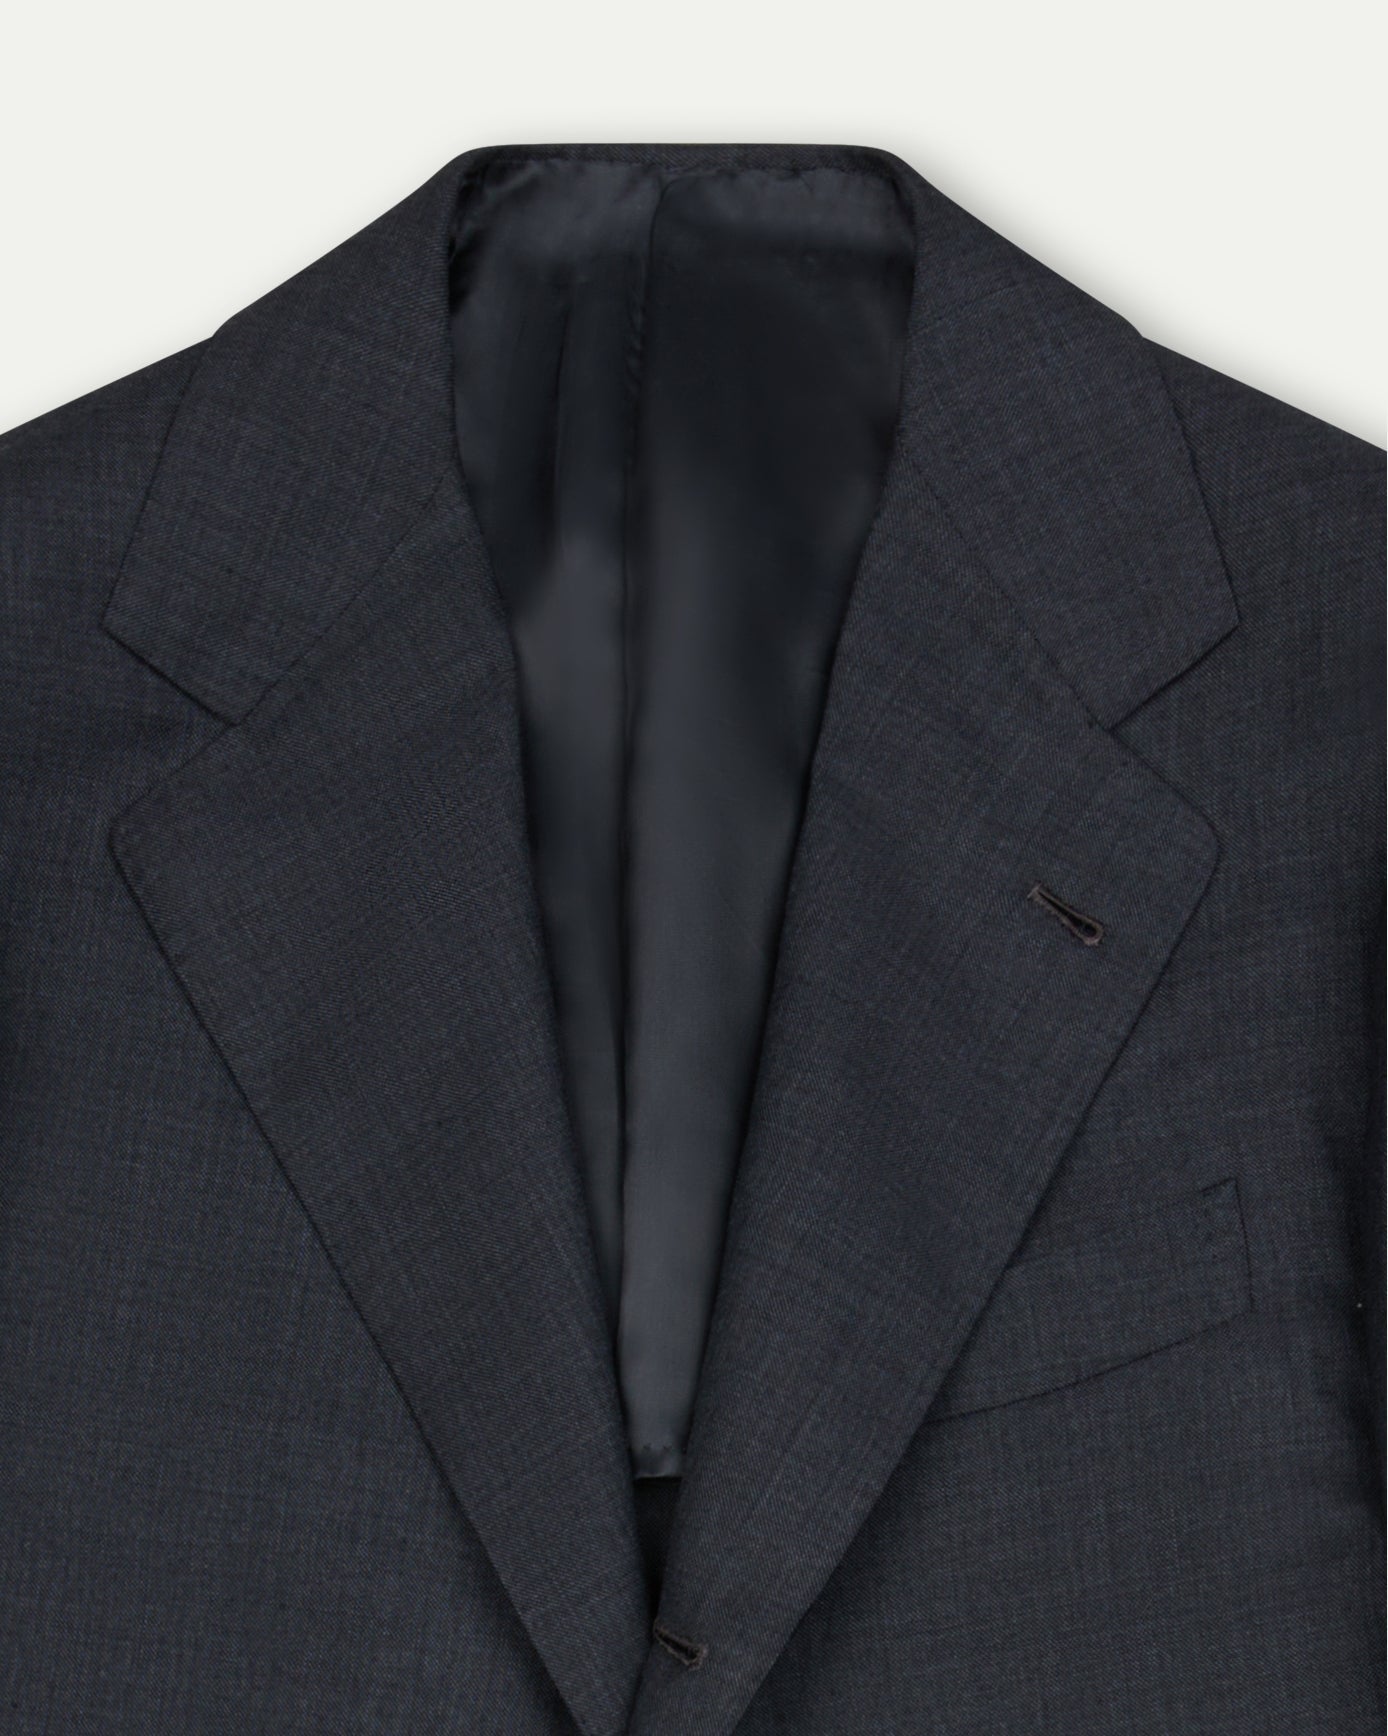 Made-To-Order Mid Grey Sharkskin Suit Jacket